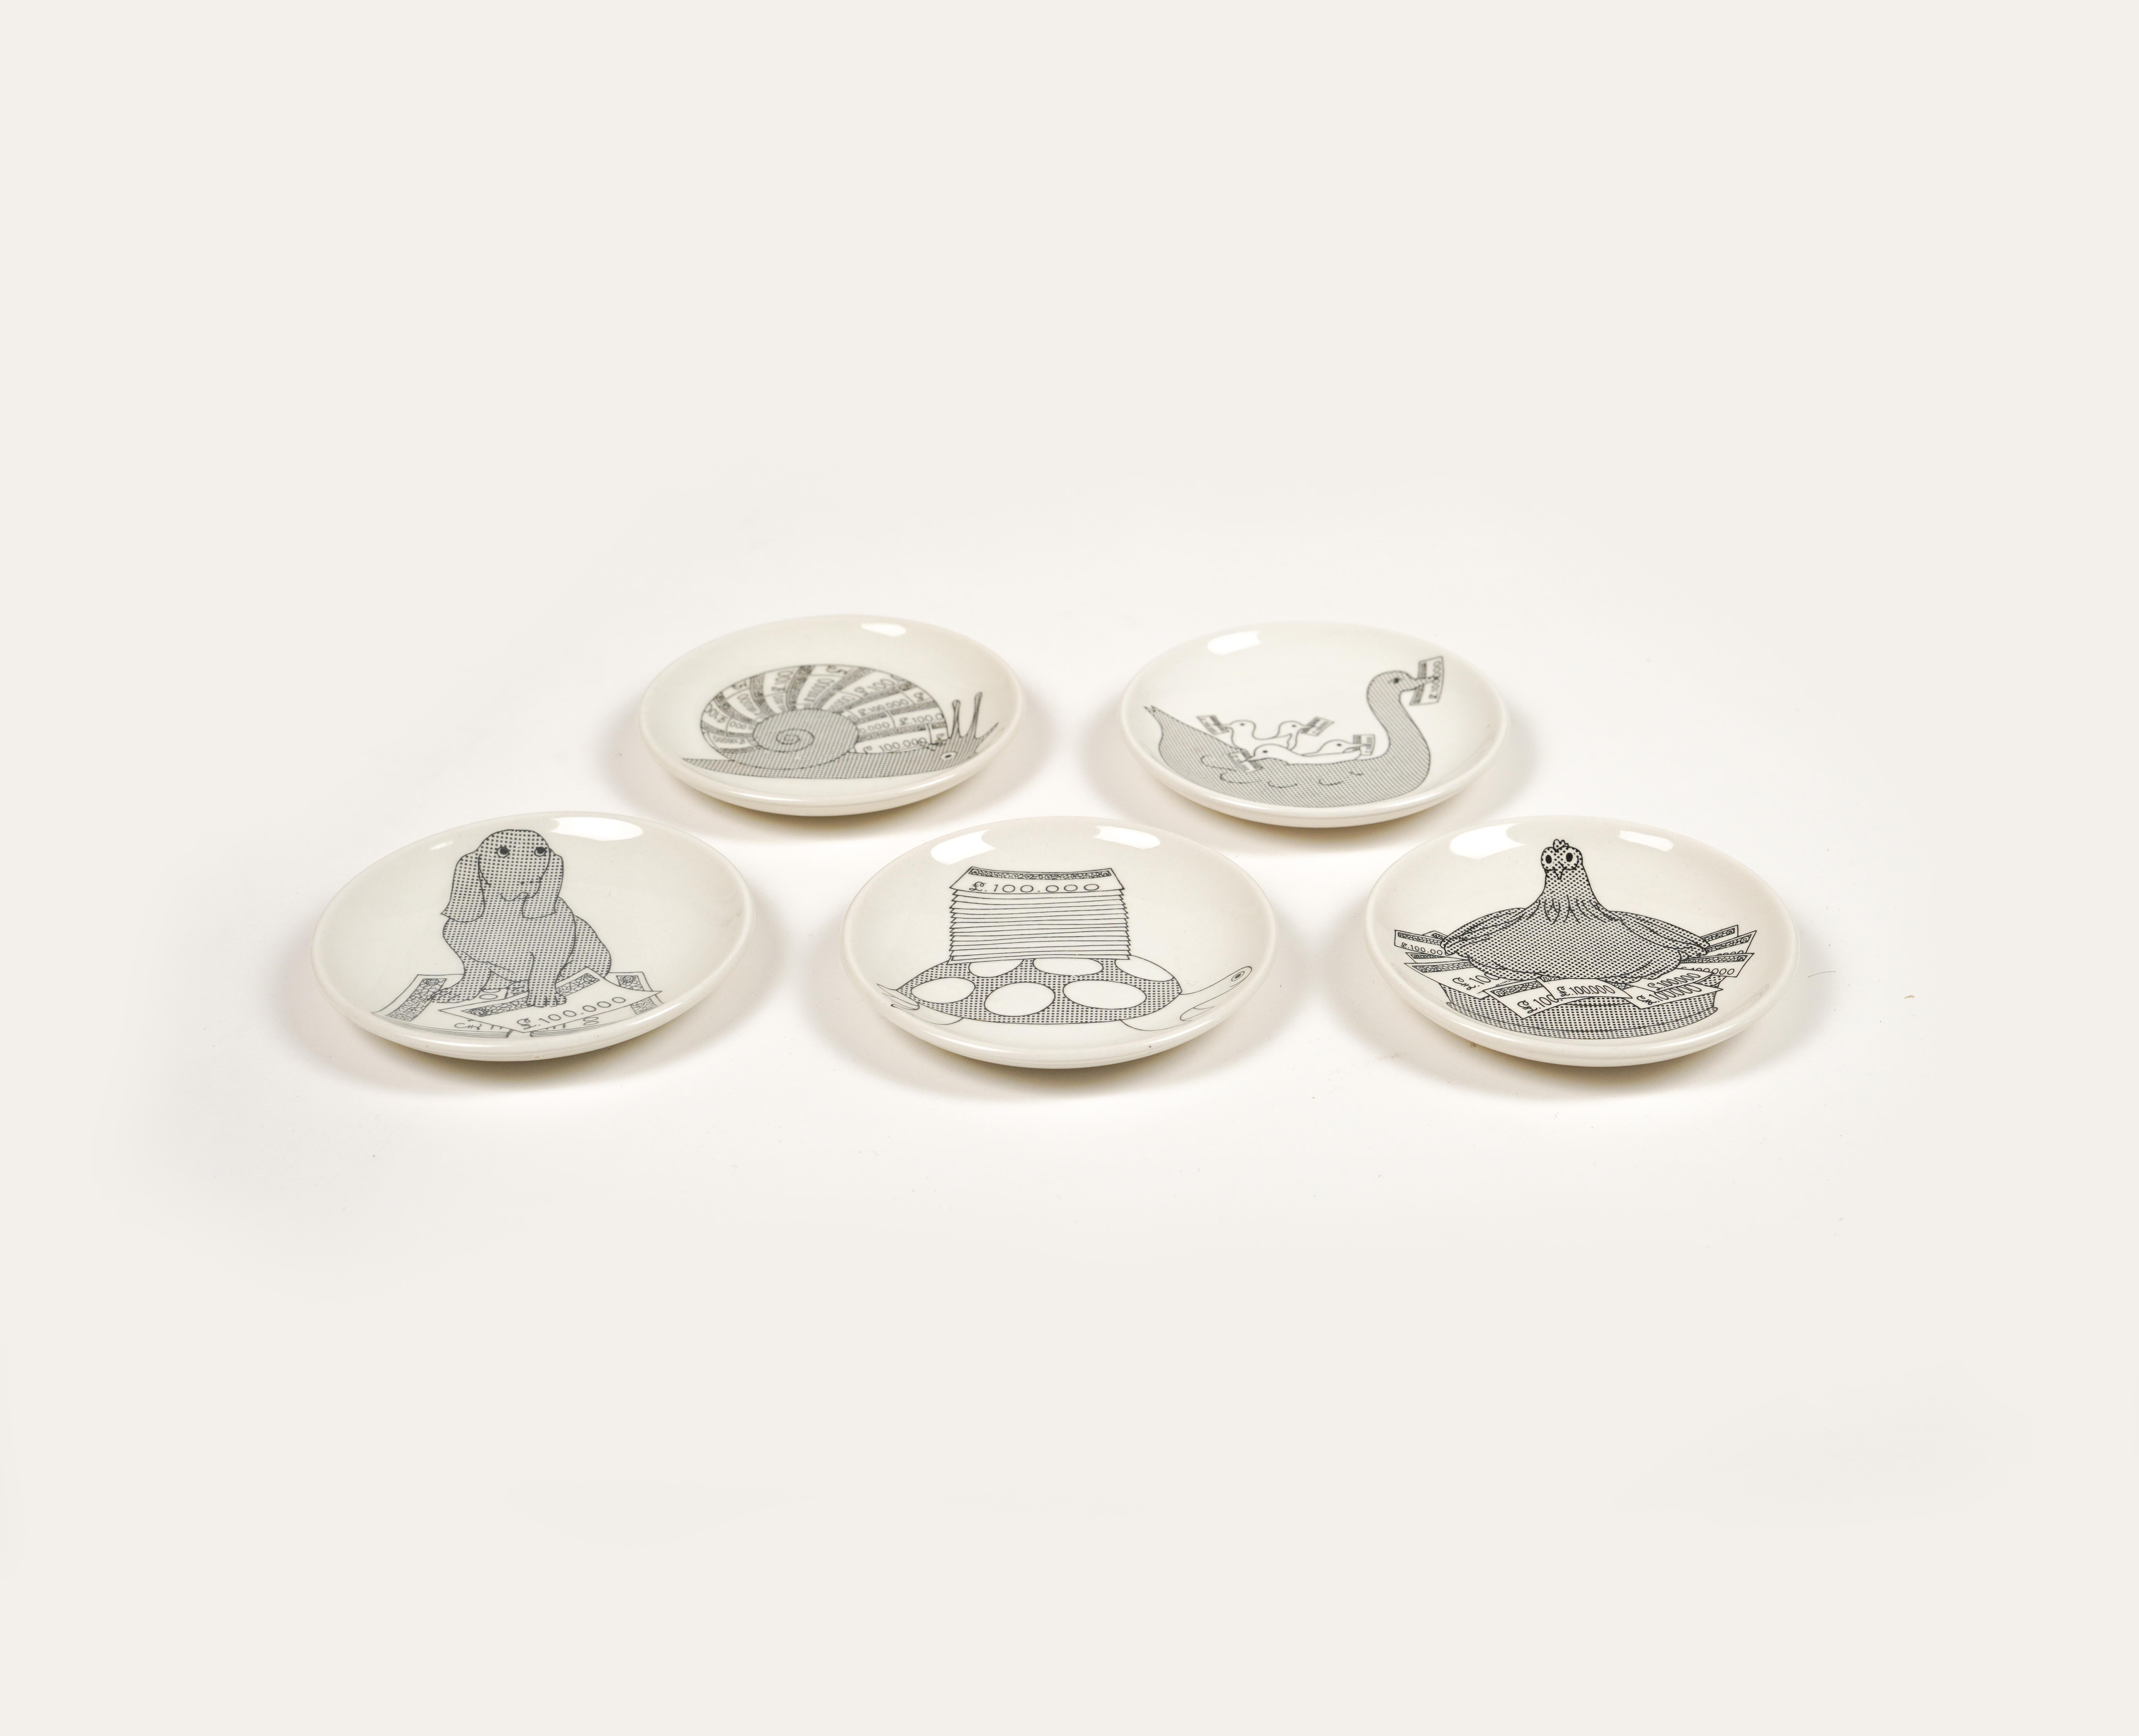 Italian Set of 5 Small Plate or Coasters in Porcelain by Piero Fornasetti, Italy 1950s For Sale